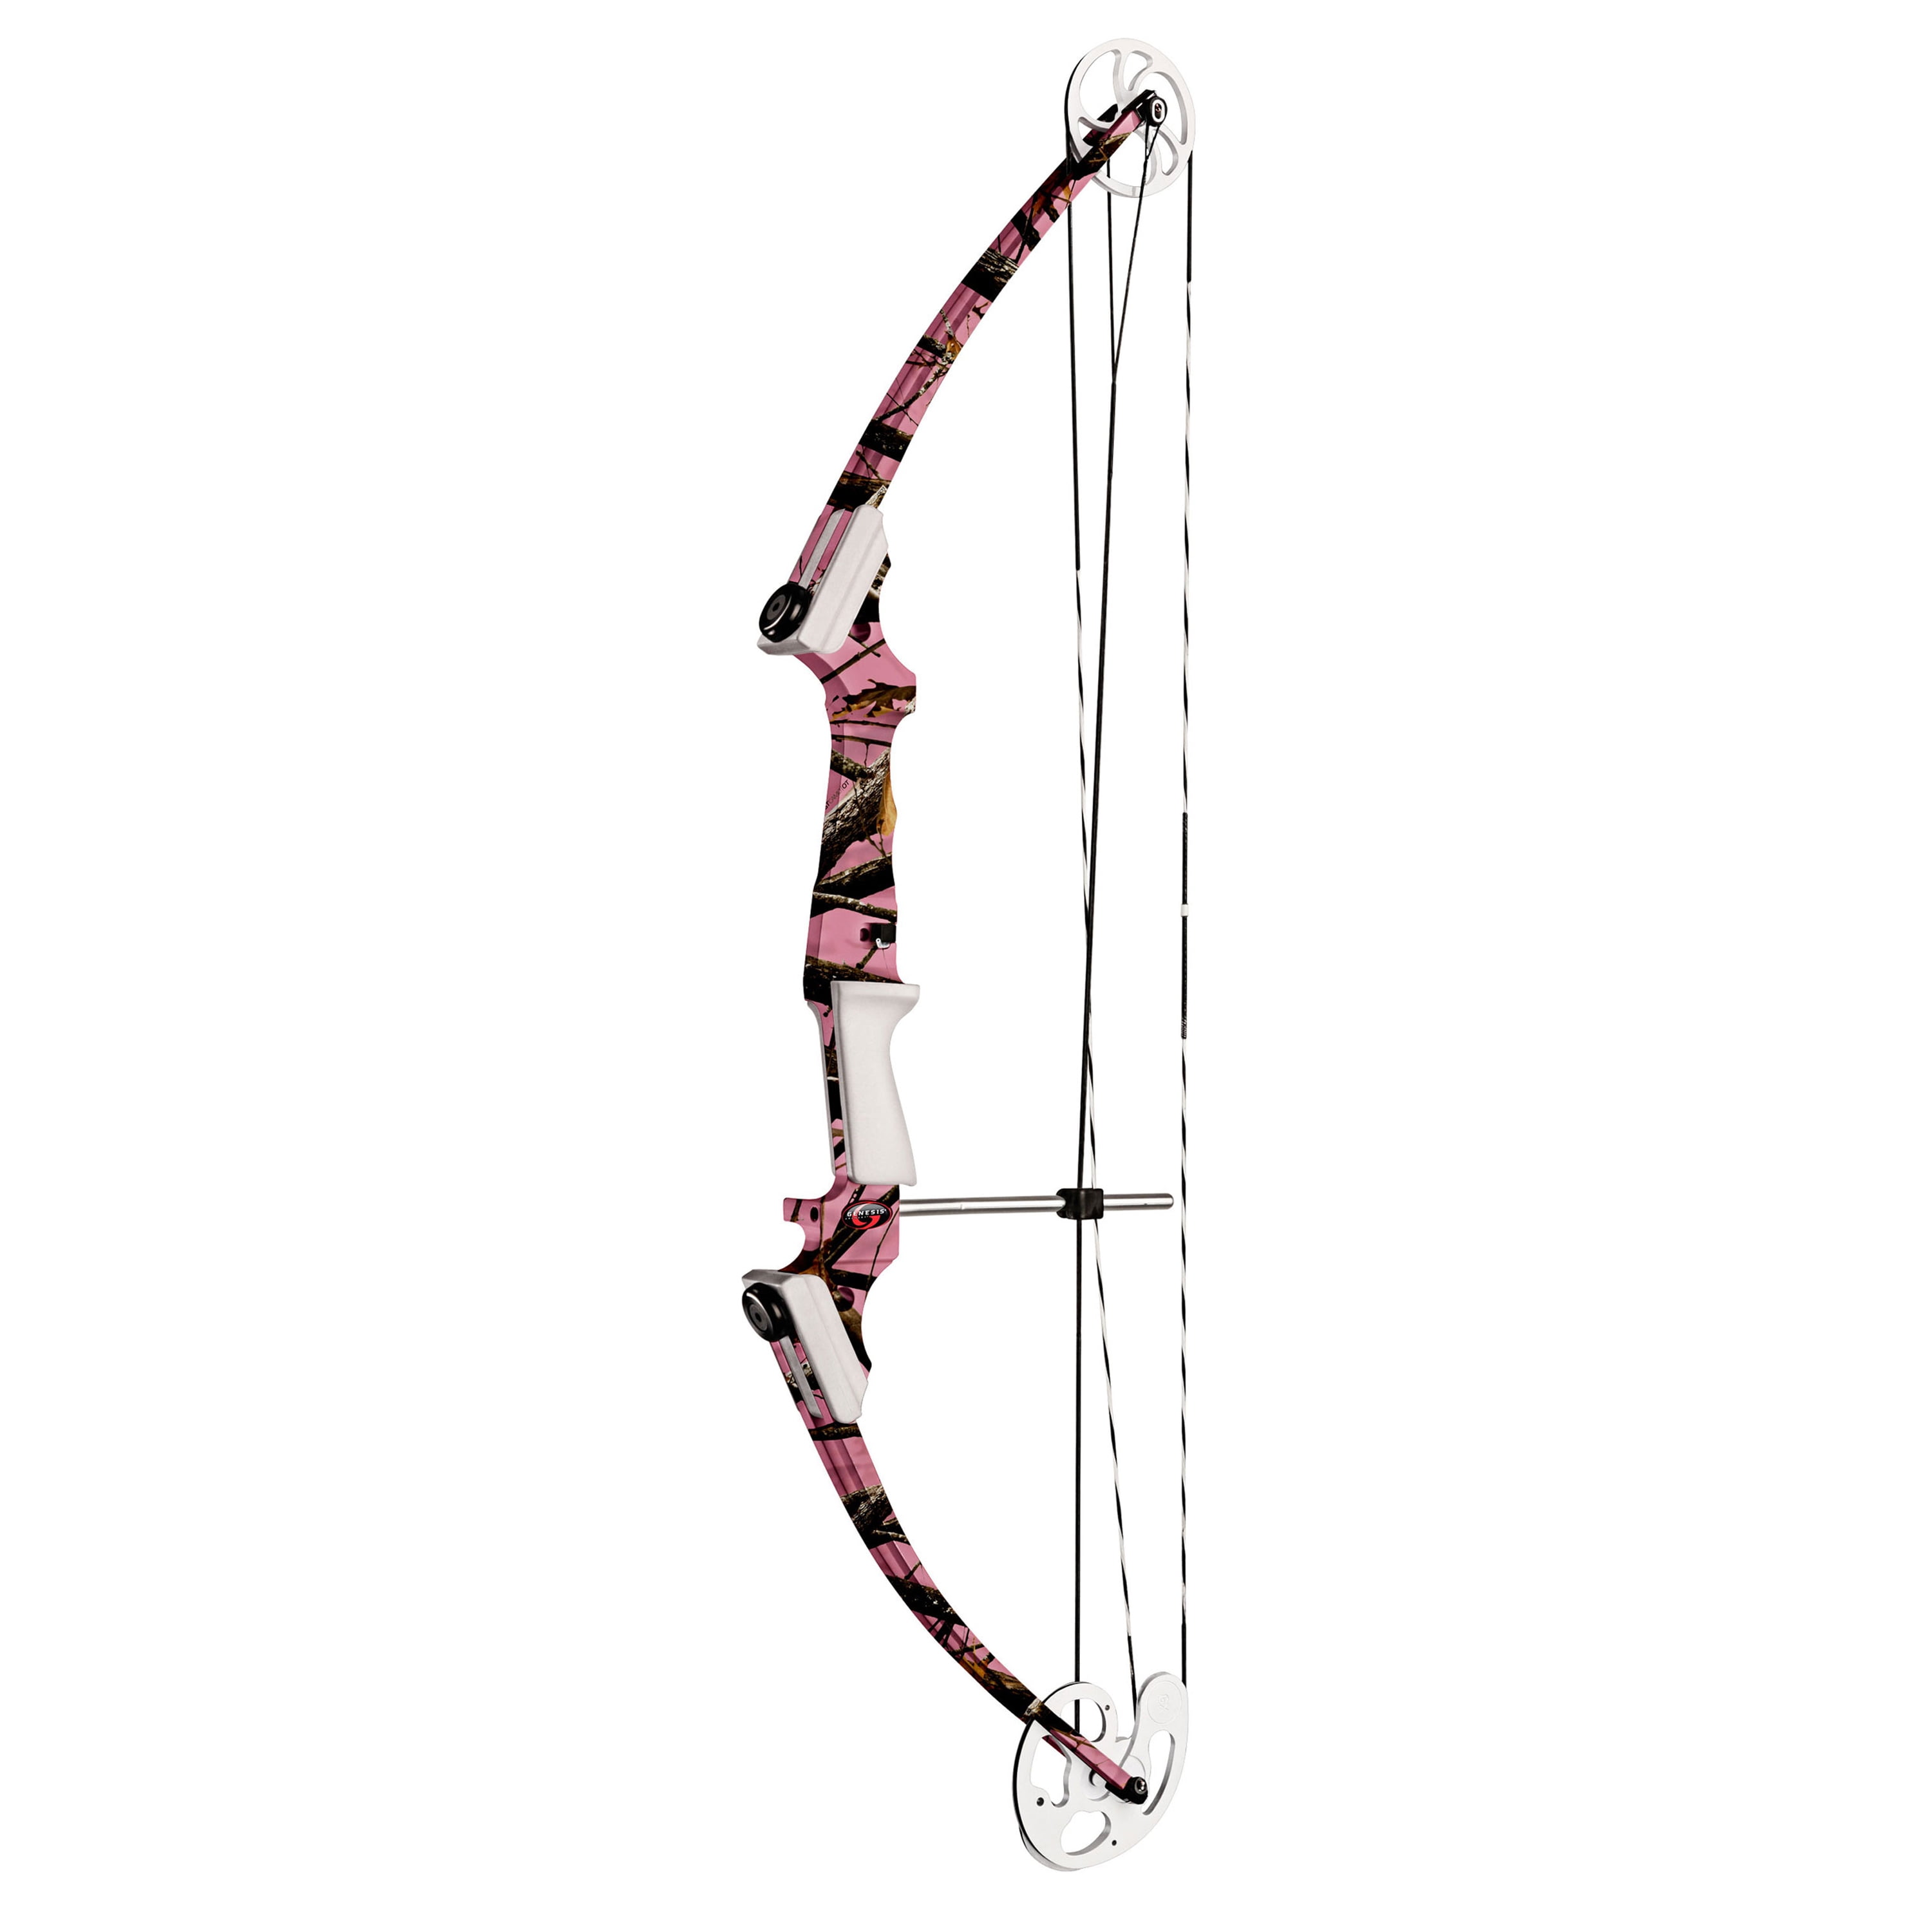 Bow Right Handed Quiver Pink Genesis Original Compound Archery Kit w/ Arrows 